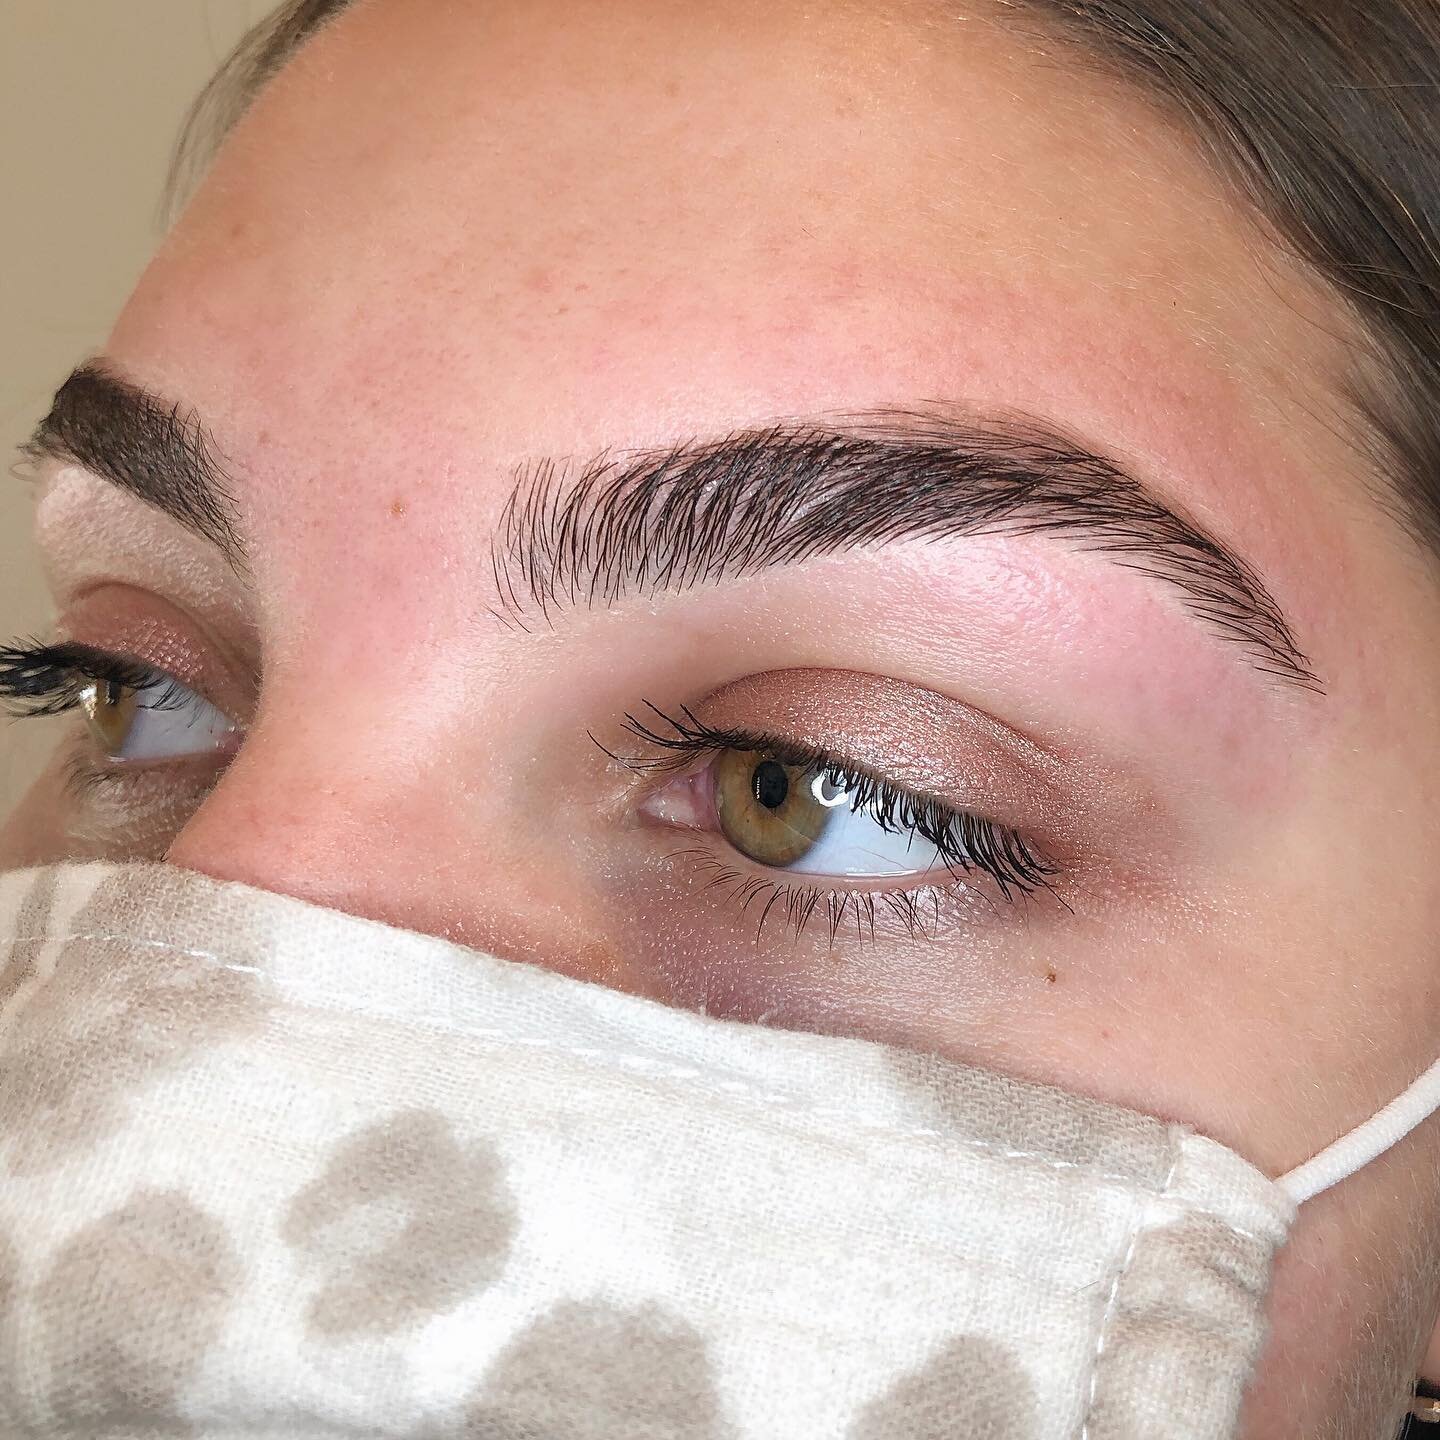 This has been a BUSY 3 weeks, but it has been so amazing to be back to doing brows and seeing your beautiful faces✨
.
.
.
.
.
#eyebrowshaping #eyebrows #ocsalon #alisoviejo #abh #kbb